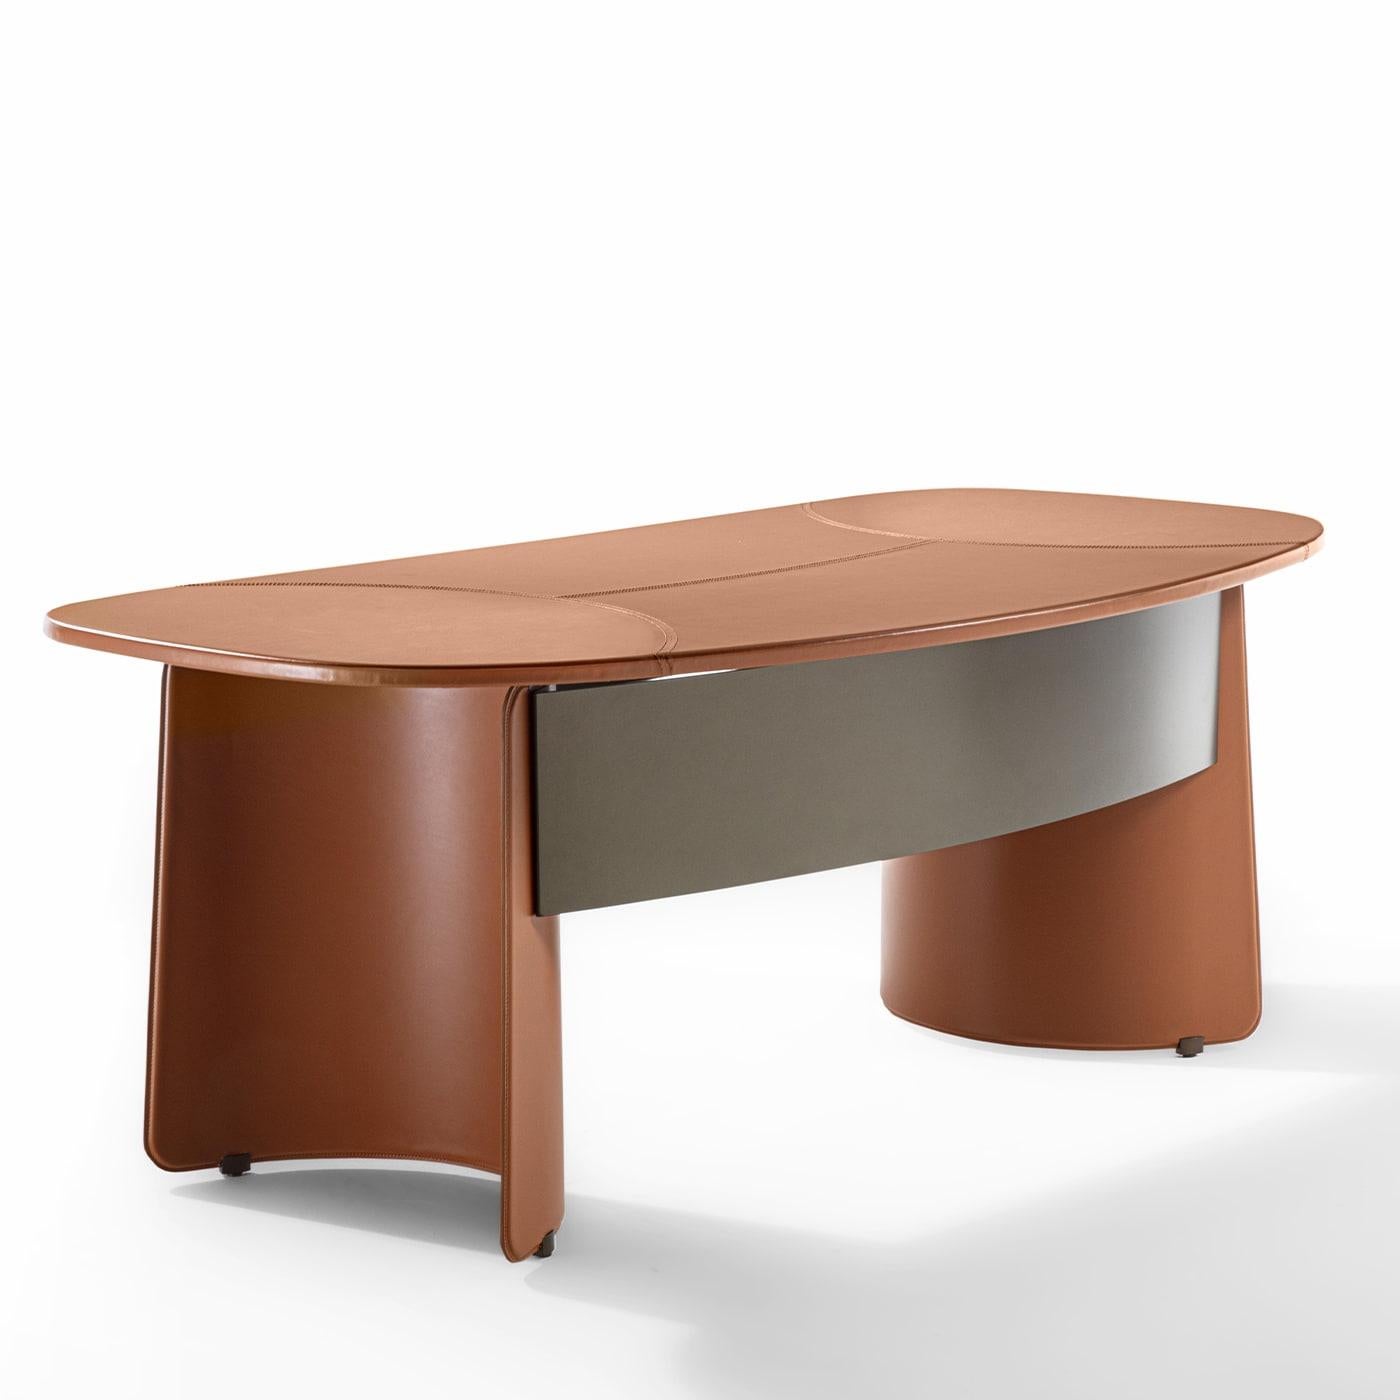 The Butterfly desk has a folded sheet metal base covered in leather and the top is made in leather with seams. Modesty in bronze lacquered sheet metal. Please, contact us for further information and options.